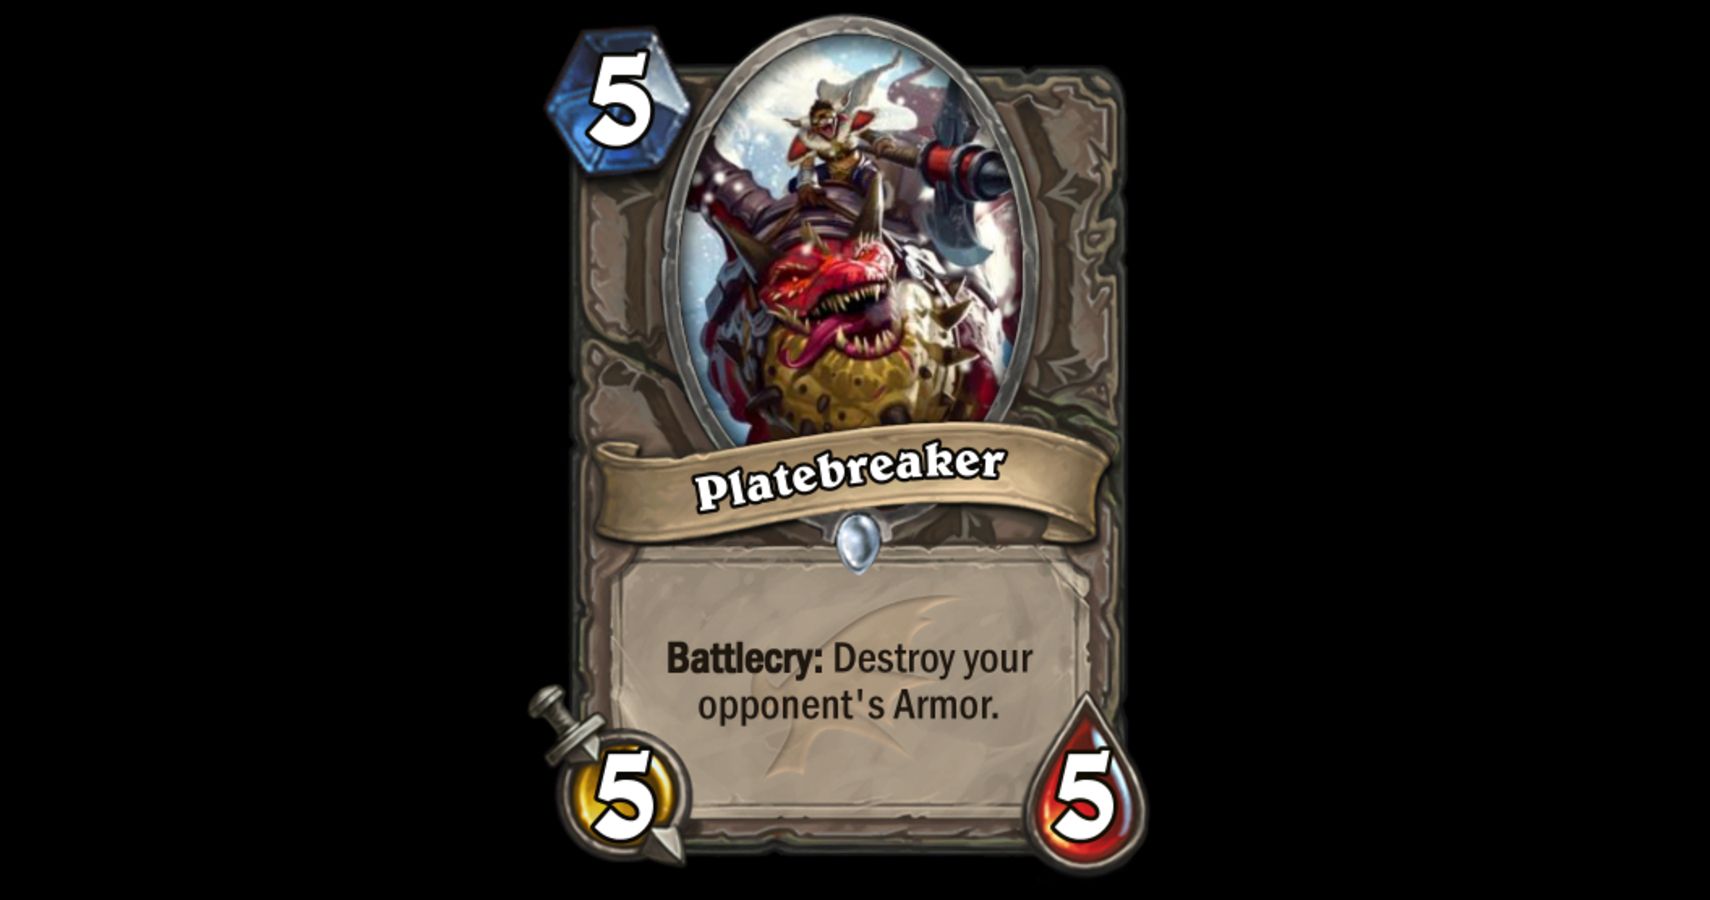 Hearthstones Latest Card Will Shatter Control Warrior As A Class For The Next Two Years